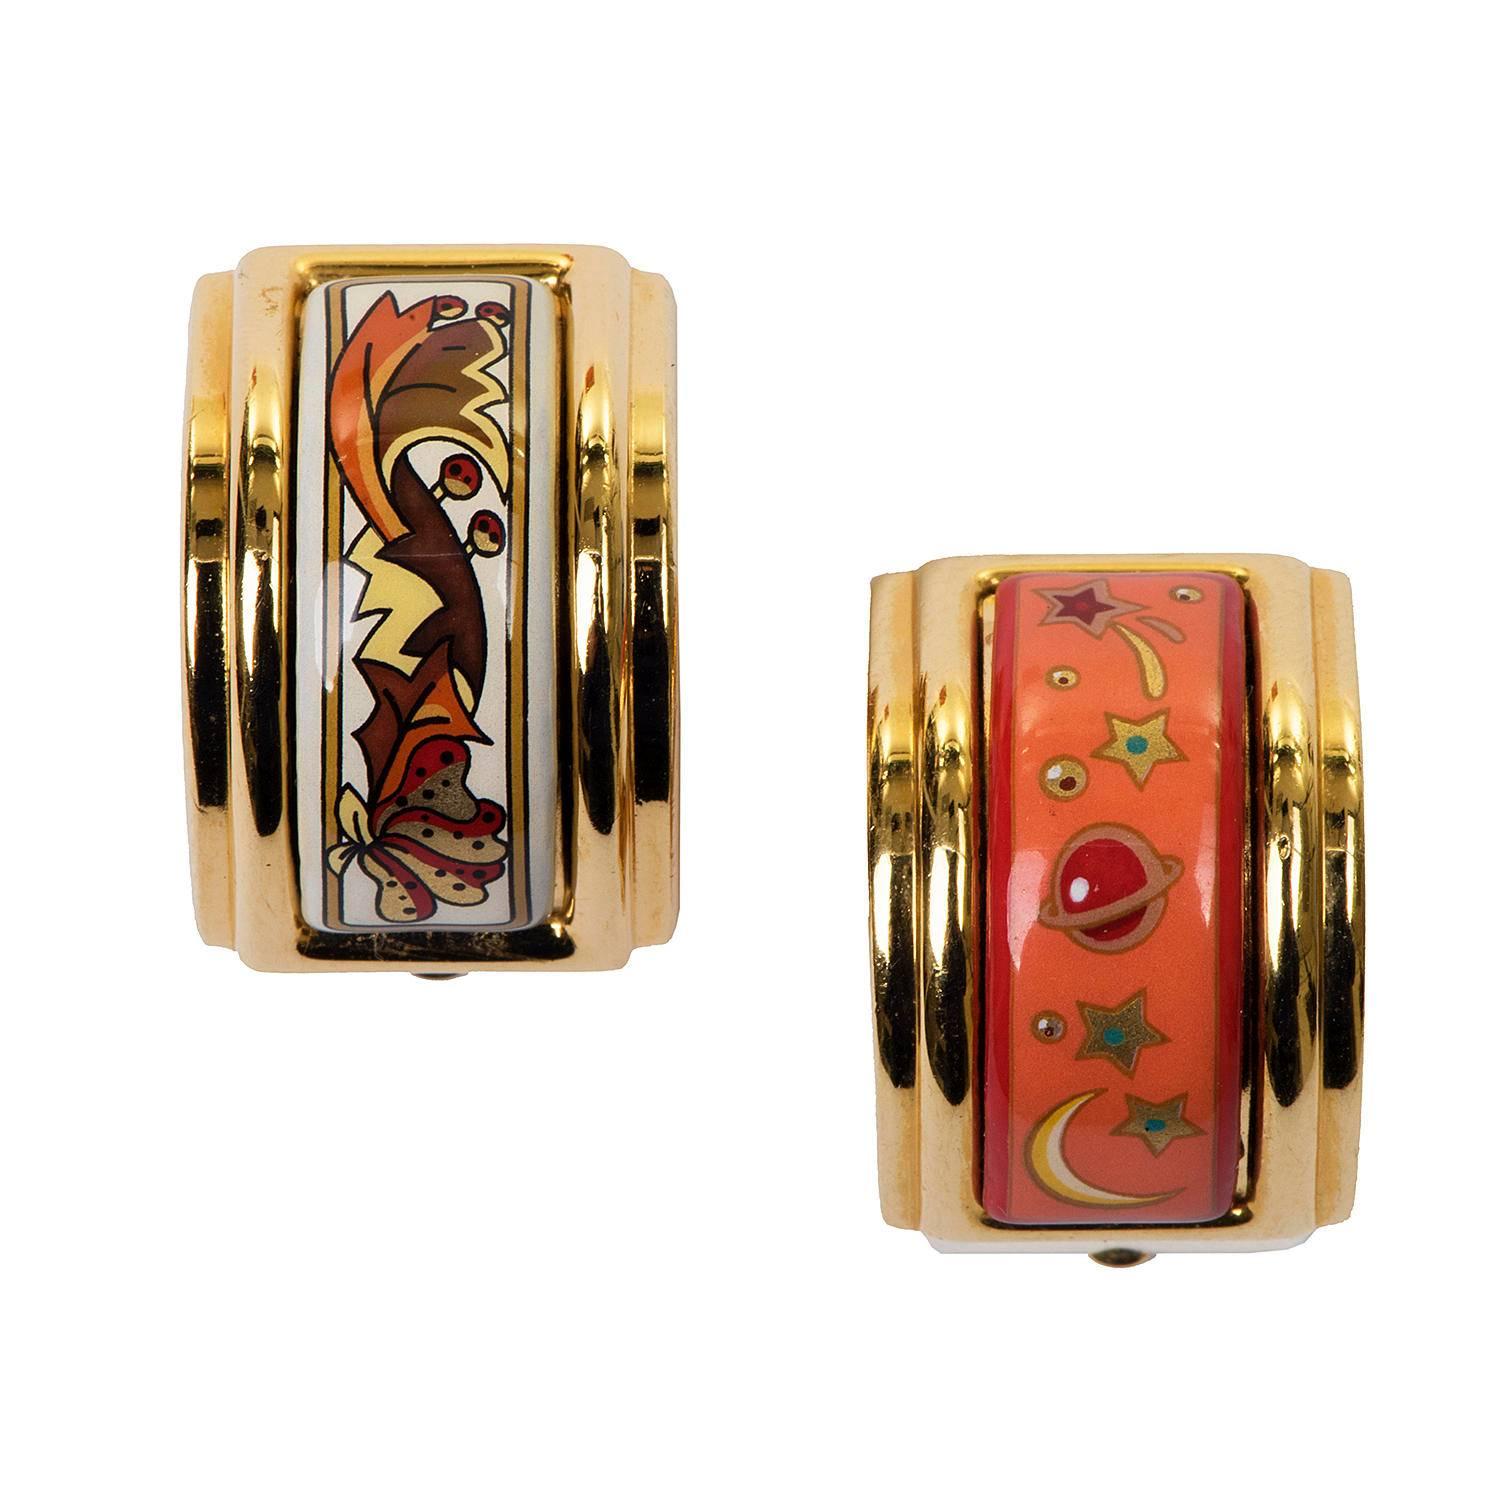 An Exquisite Boxed Pair of Hermes Gold & Enamel Clip-on Earrings